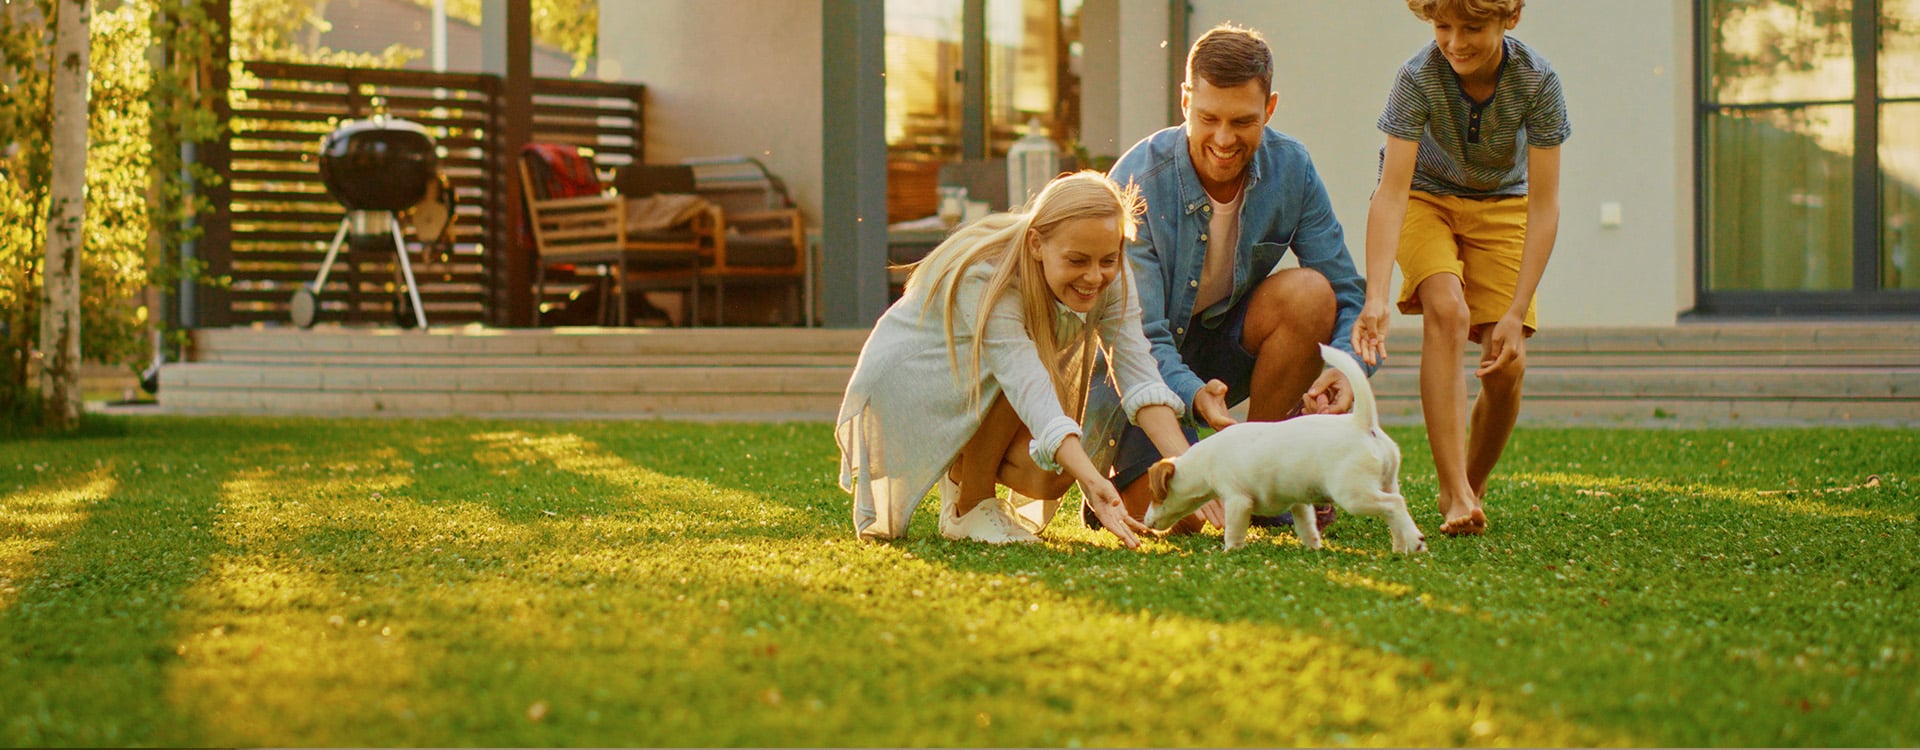 family in yard with pet